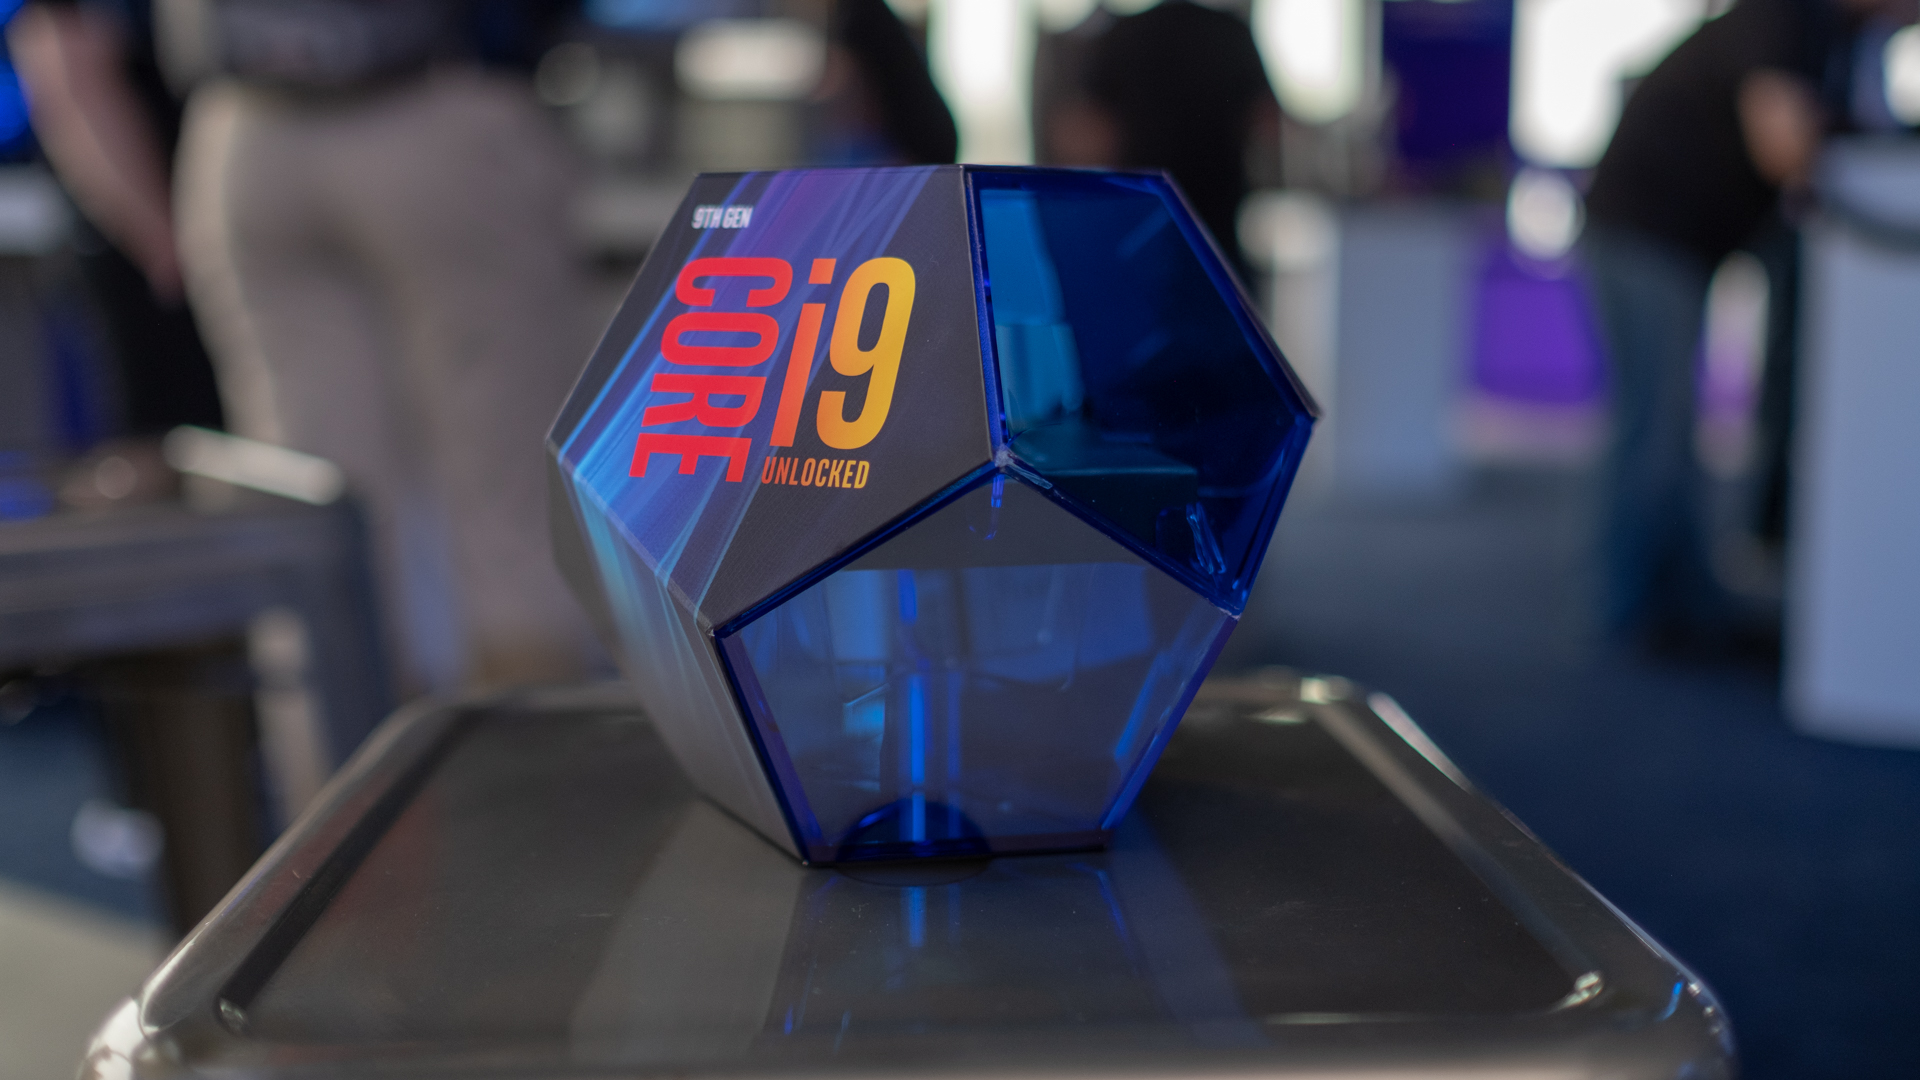 Intel Core I9 9900K Has Been Discontinued, Along With Other 9th Gen CPUs